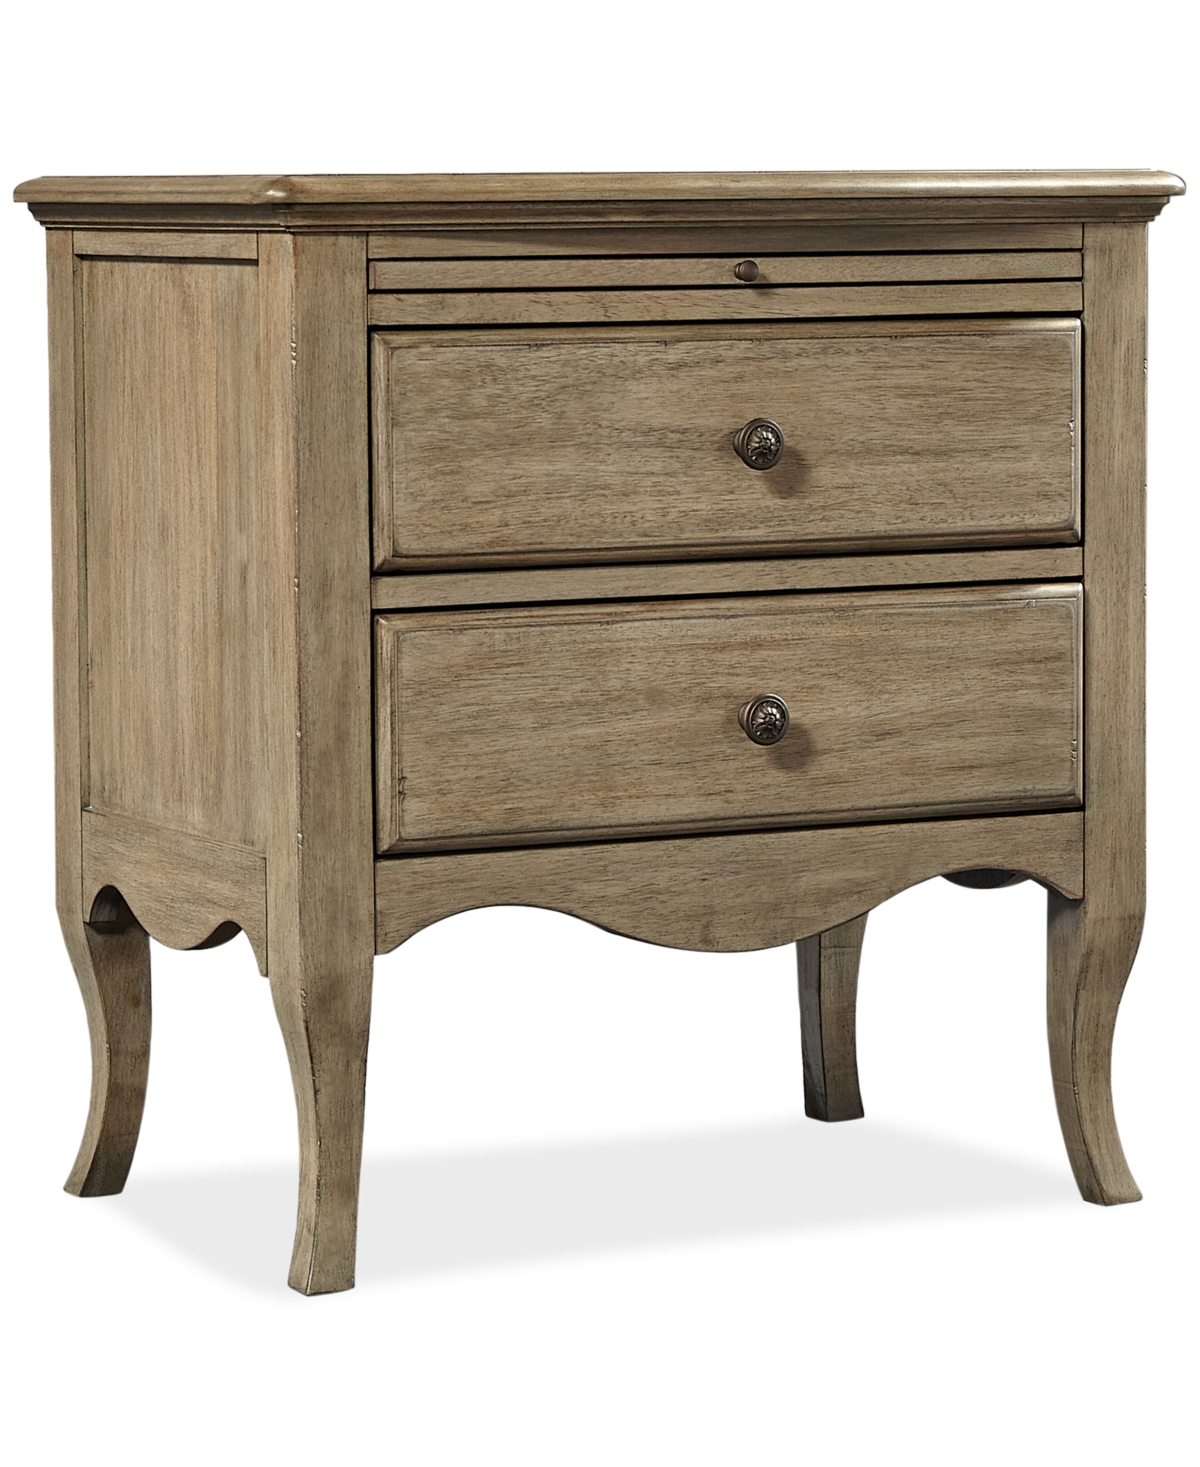 Furniture Provence 2 Drawer Nightstand In Lt. Brown